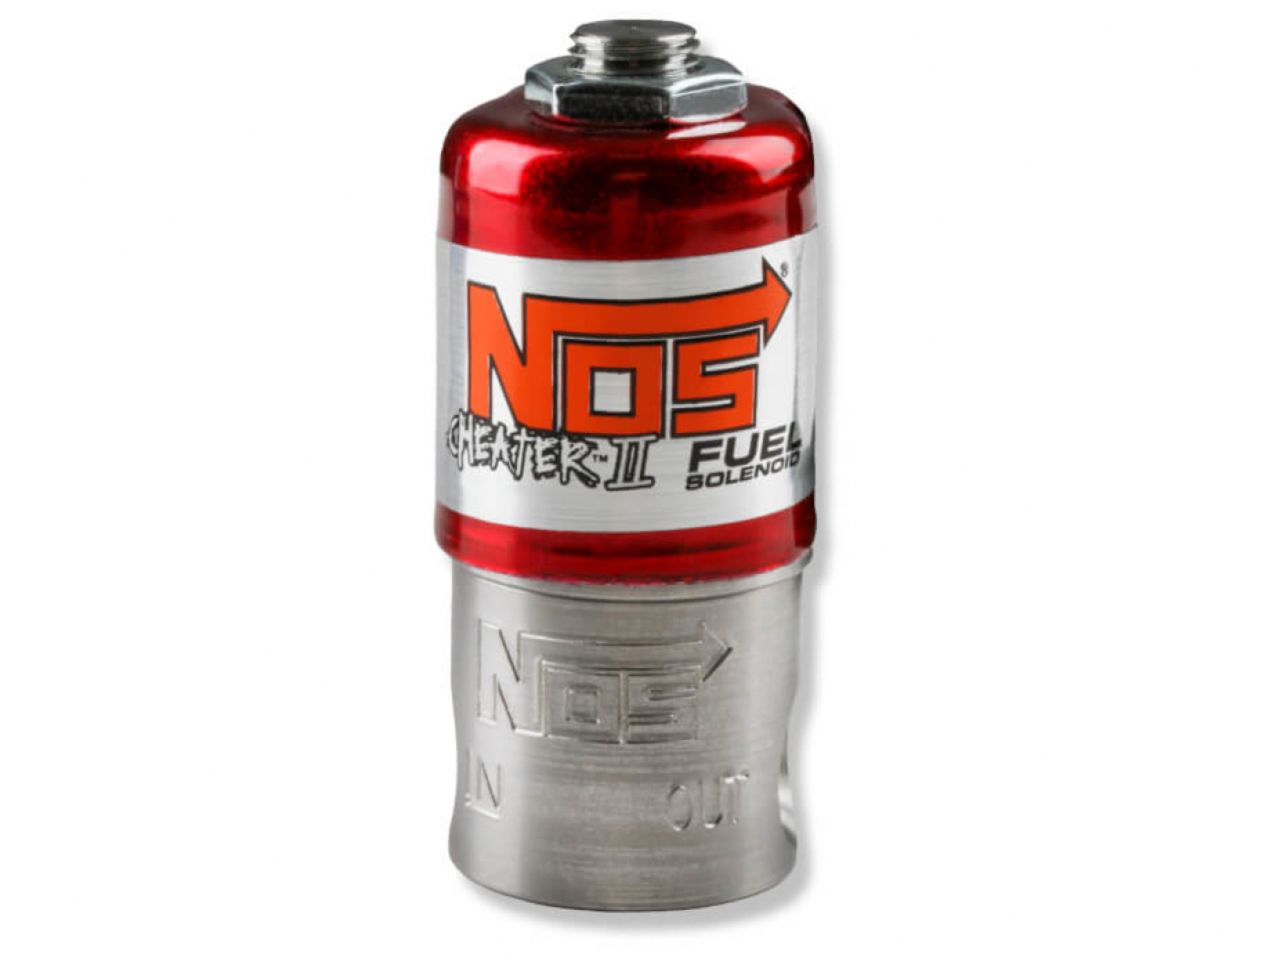 NOS Plate Wet Nitrous System - Ford